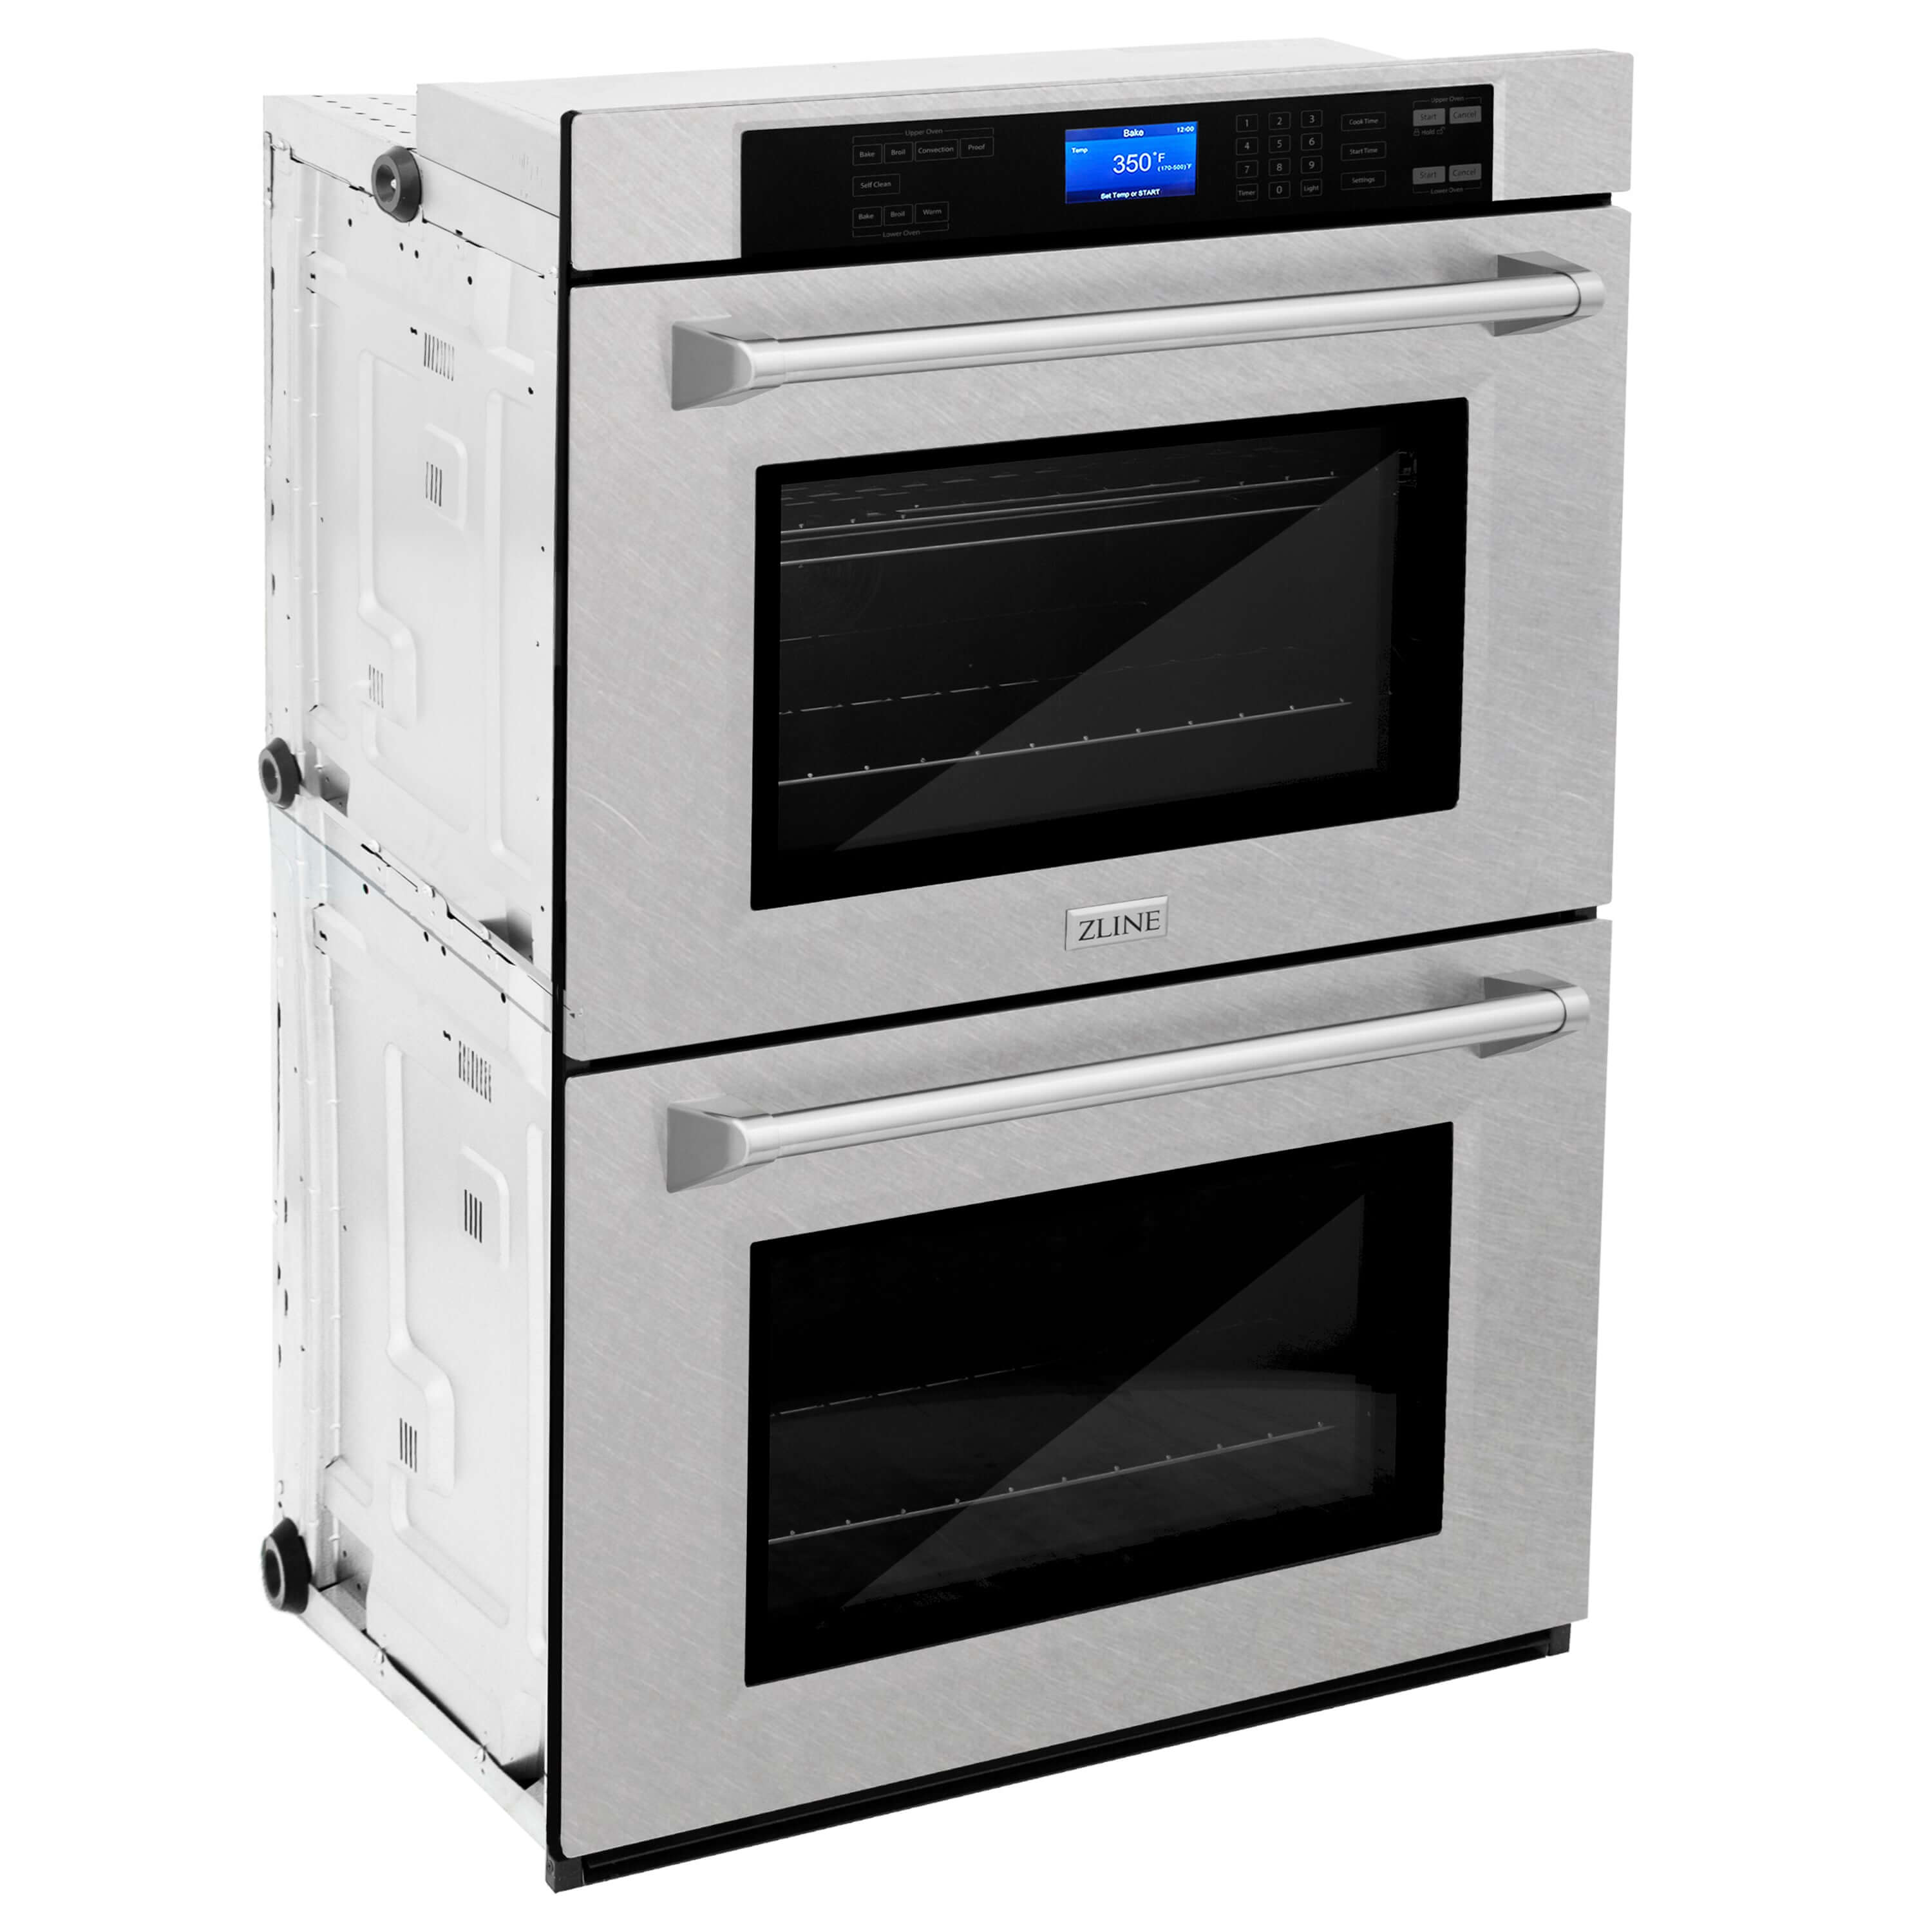 ZLINE 30 in. Professional Electric Double Wall Oven with Self Clean and True Convection in Fingerprint Resistant Stainless Steel (AWDS-30) side, oven closed.